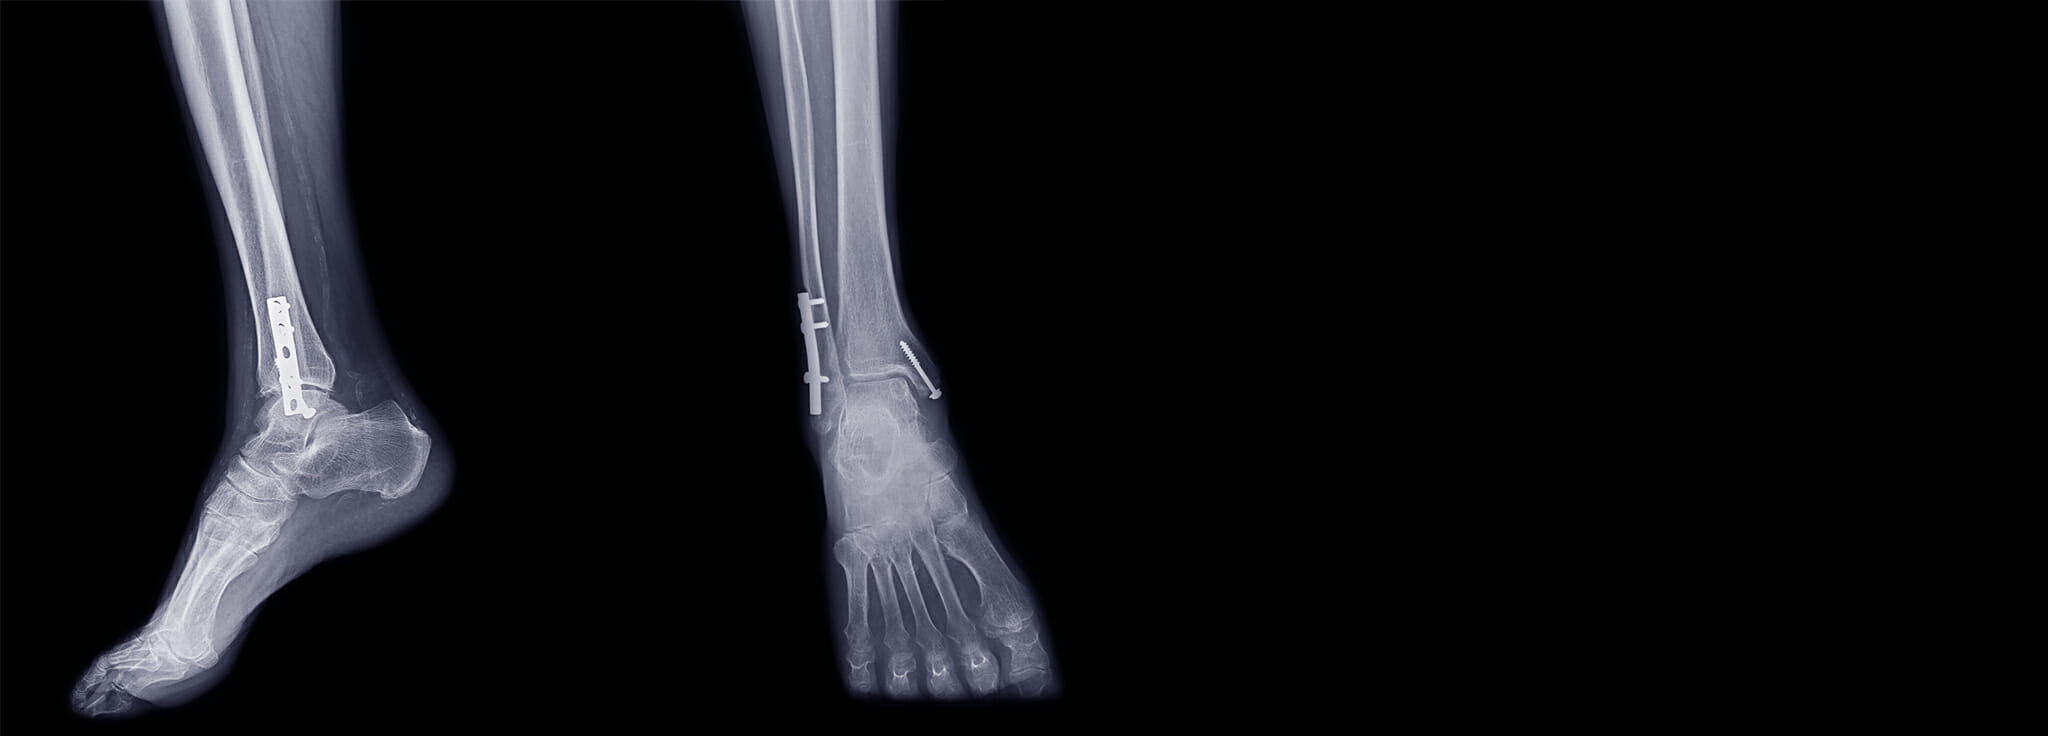 X-ray of feet with medical implants and screws